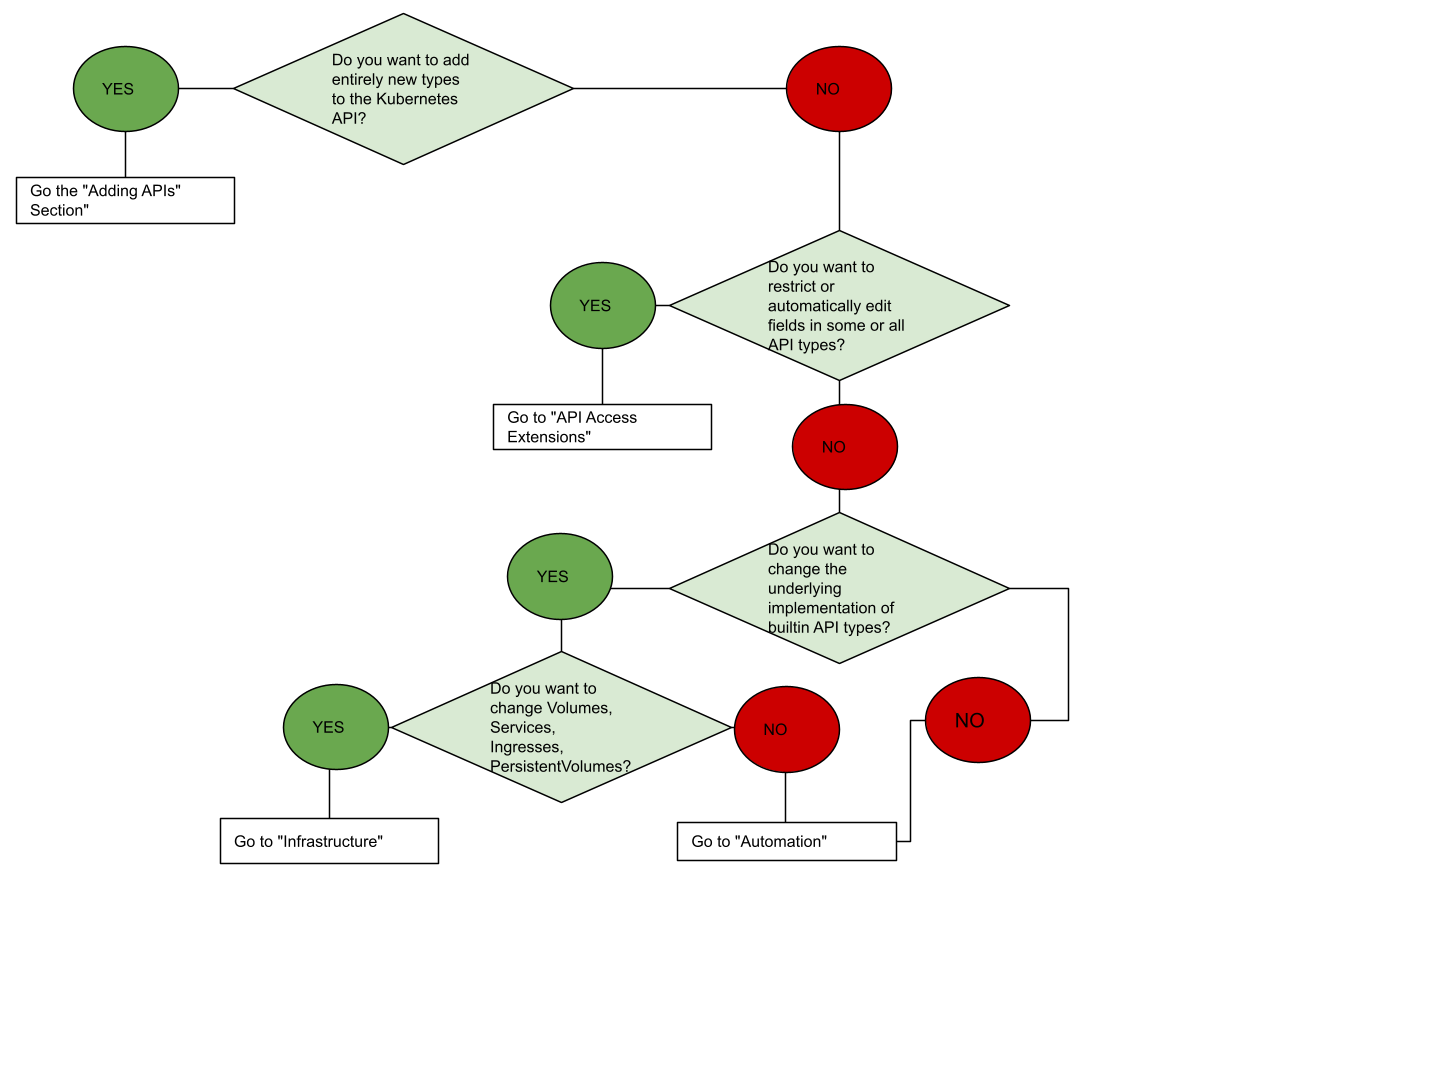 Flowchart with questions about use cases and guidance for implementers. Green circles indicate yes; red circles indicate no.